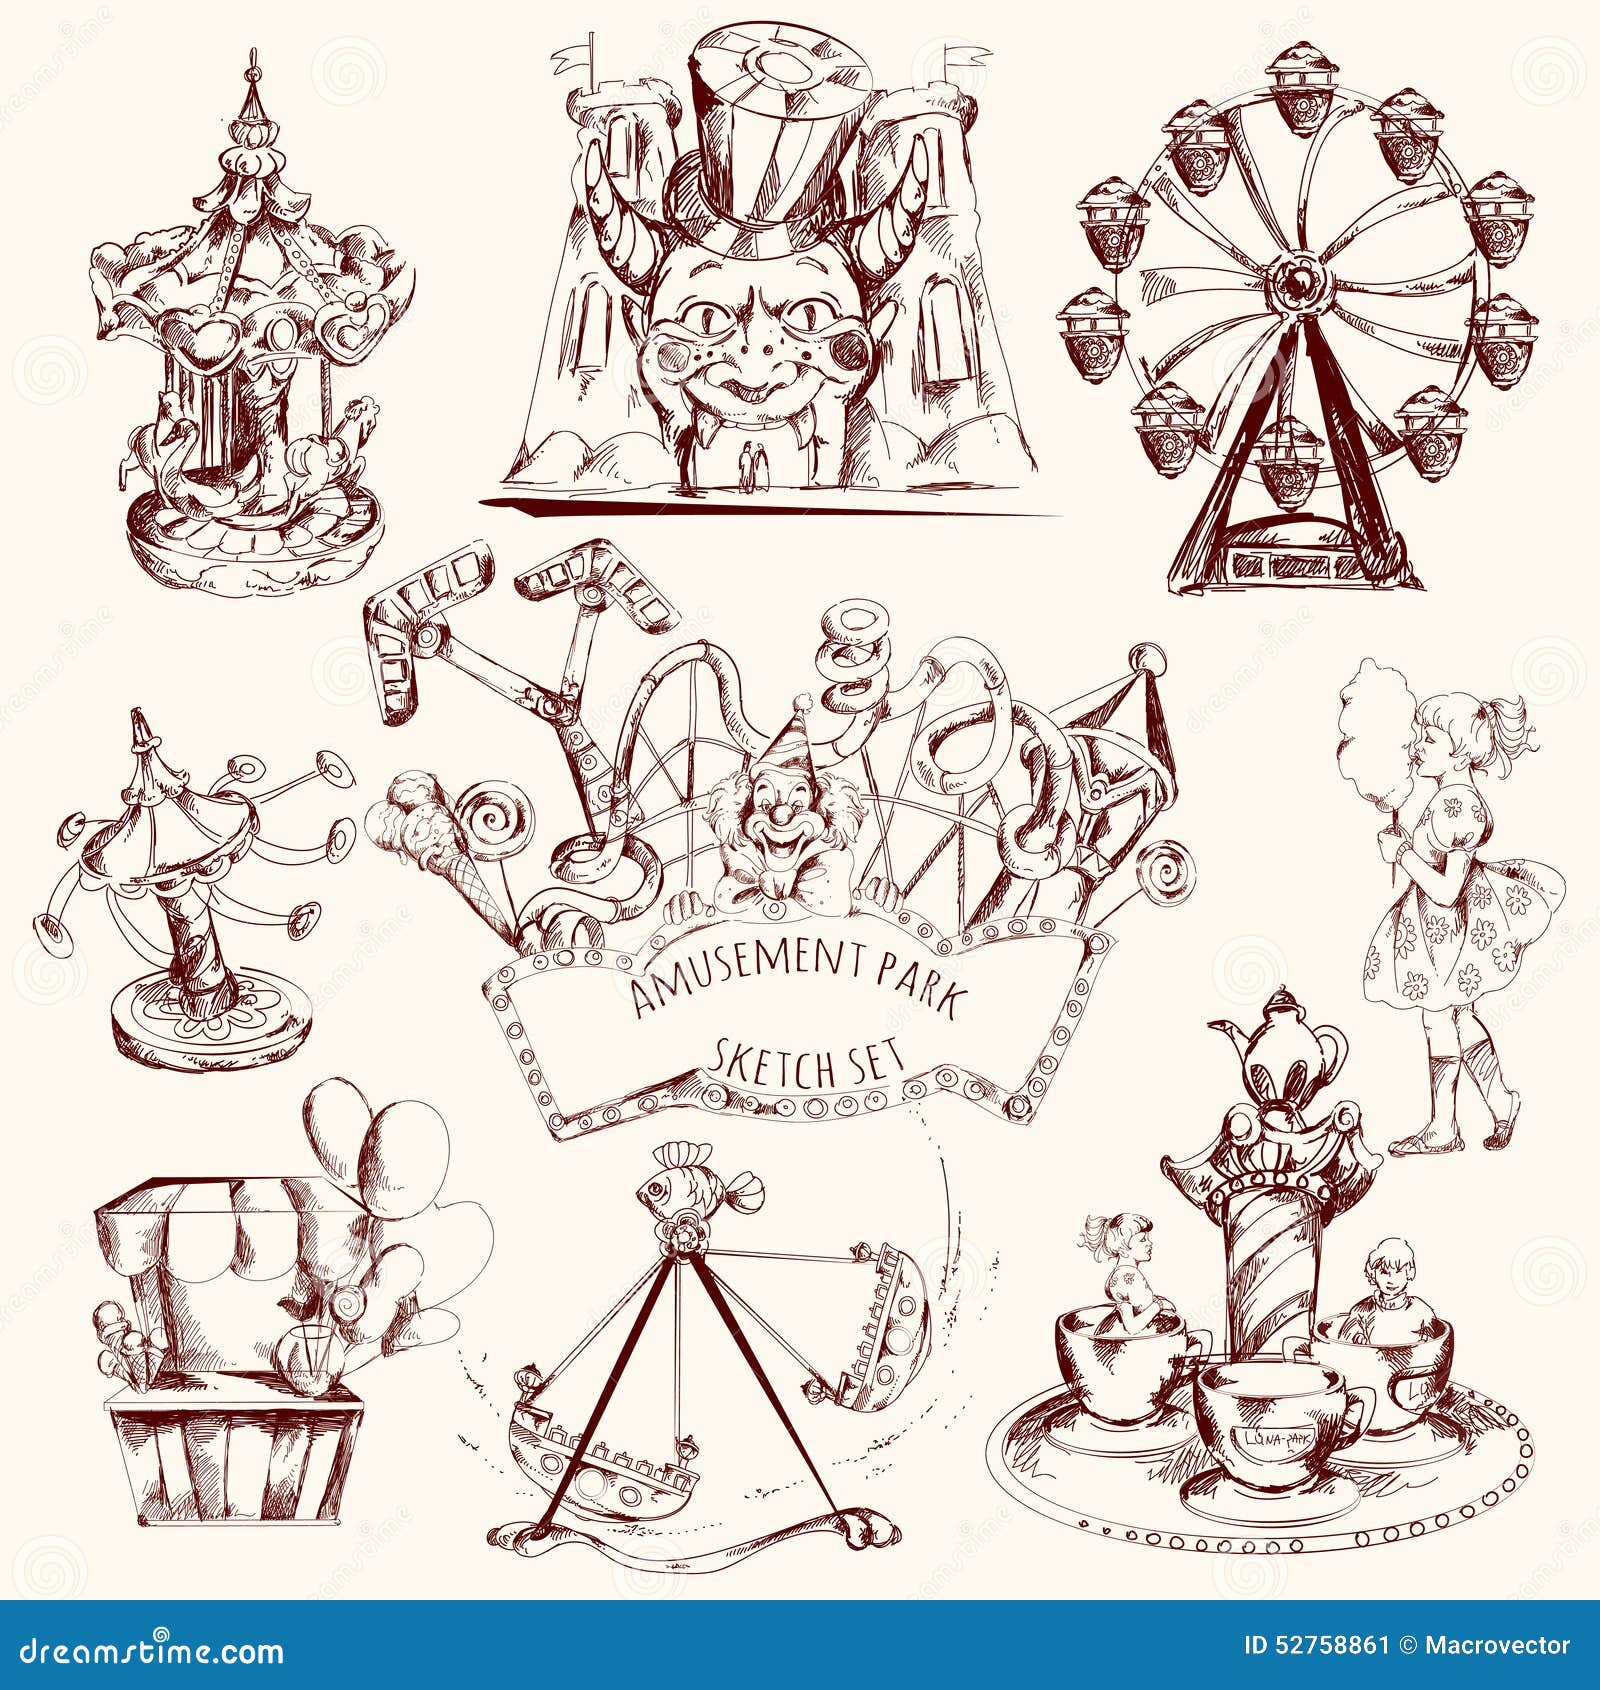 Outline Amusement Park Vector Illustrations Hand Drawn Attractions Food  Carousel Ferris Wheel Set Of Icons On White Background Stock Illustration   Download Image Now  iStock